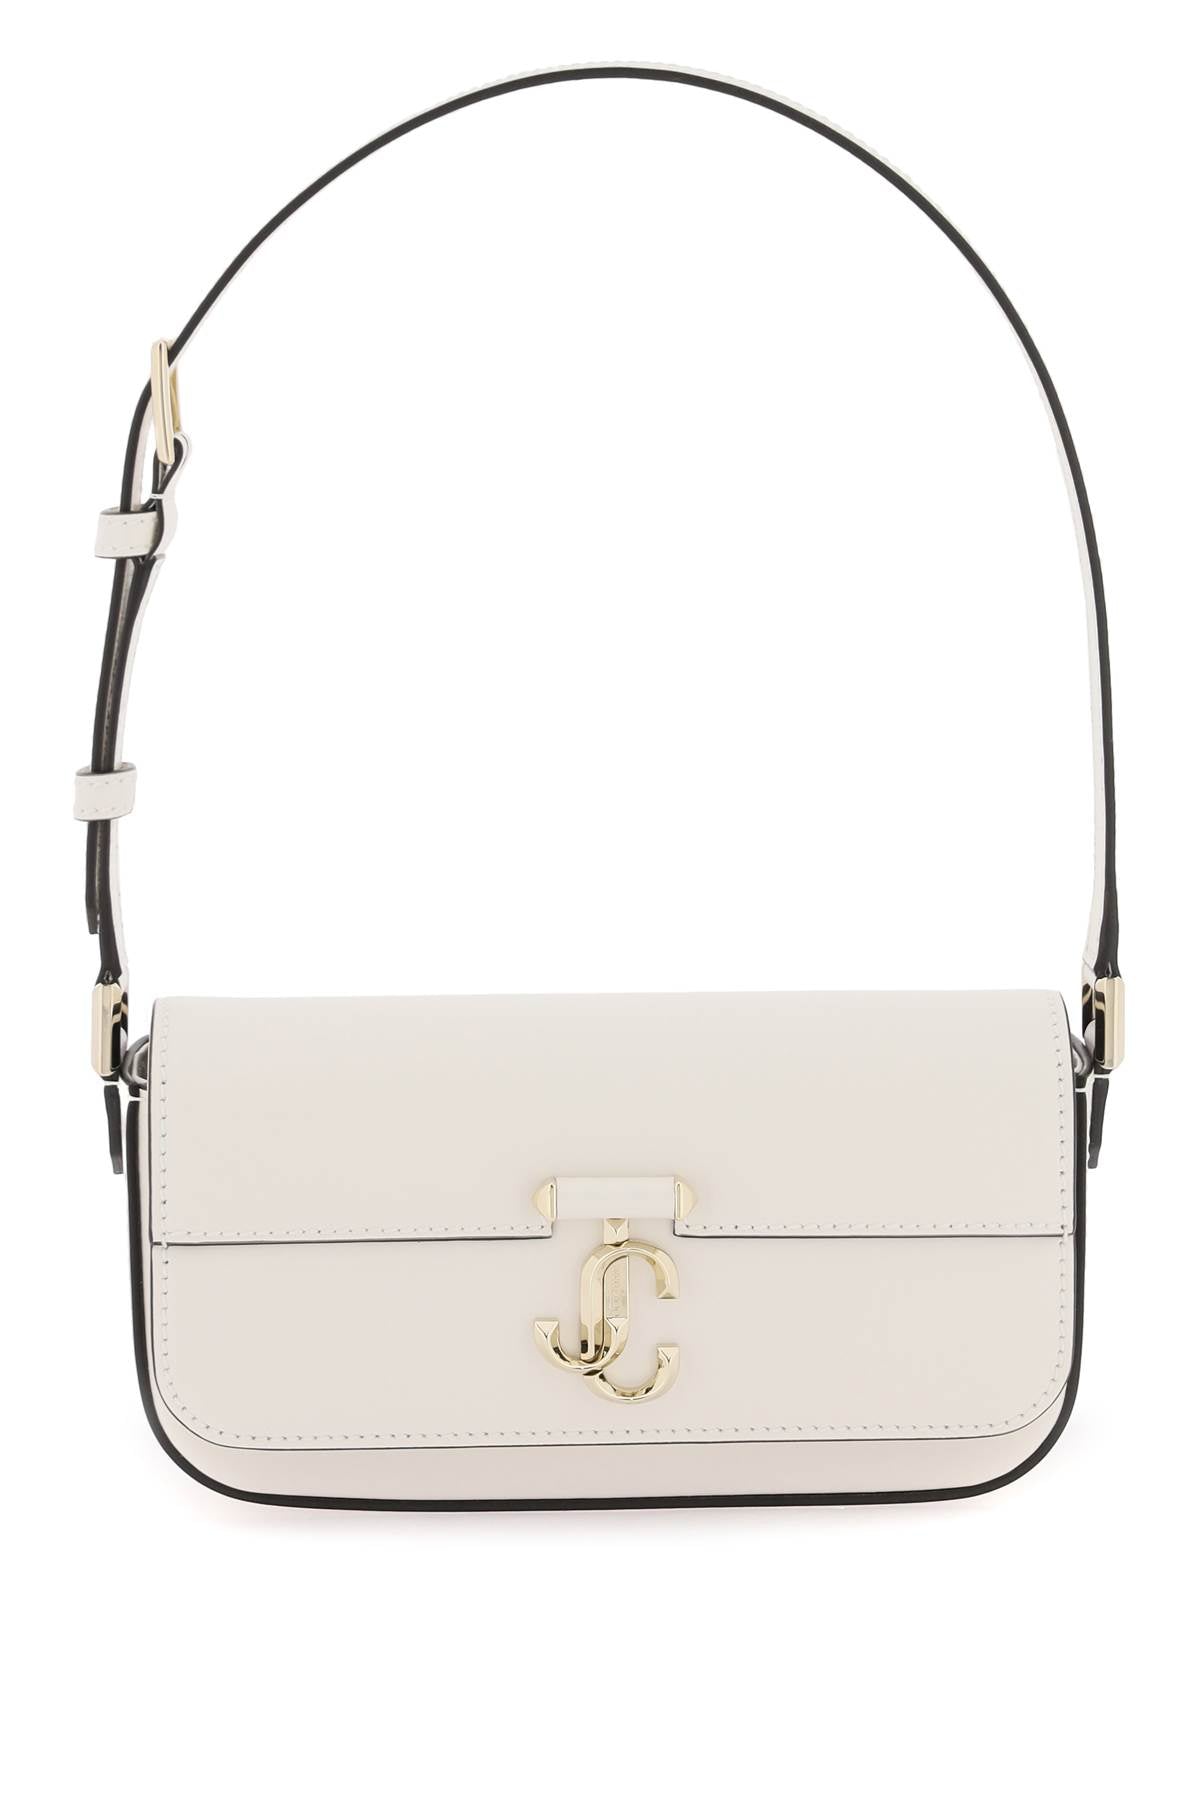 JIMMY CHOO White Mini Shoulder Handbag with Gold JC Detail and Magnetic Closure for Women, SS24